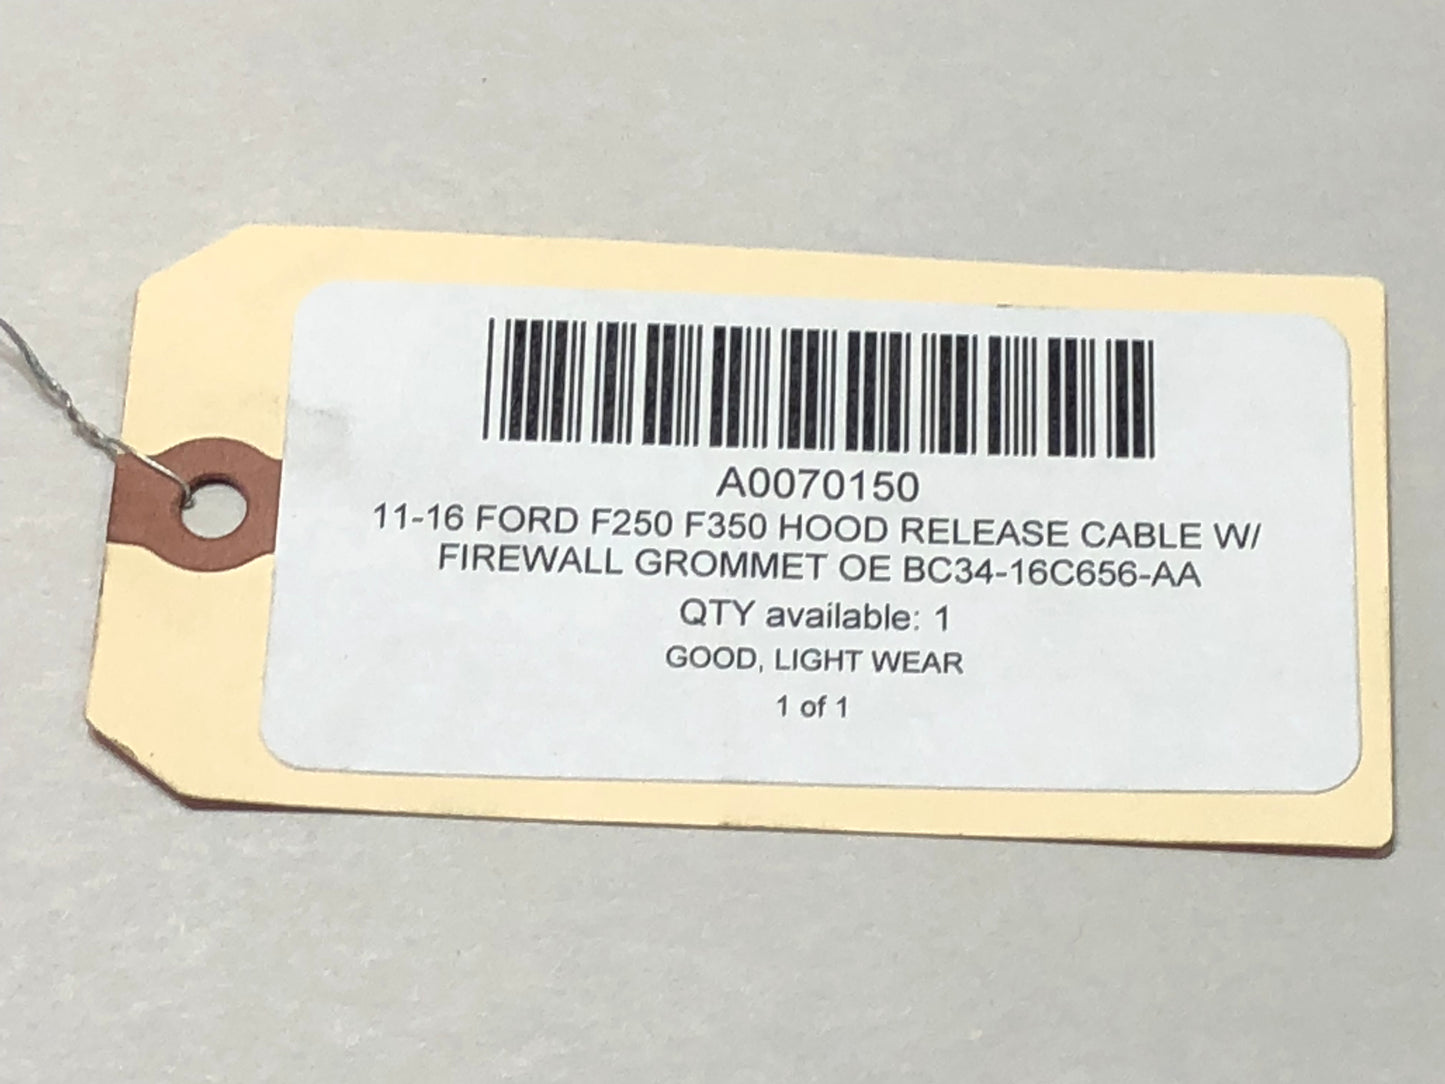 11-16 Ford F250 F350 Hood Release Cable W/ Firewall Grommet OE BC34-16C656-AA